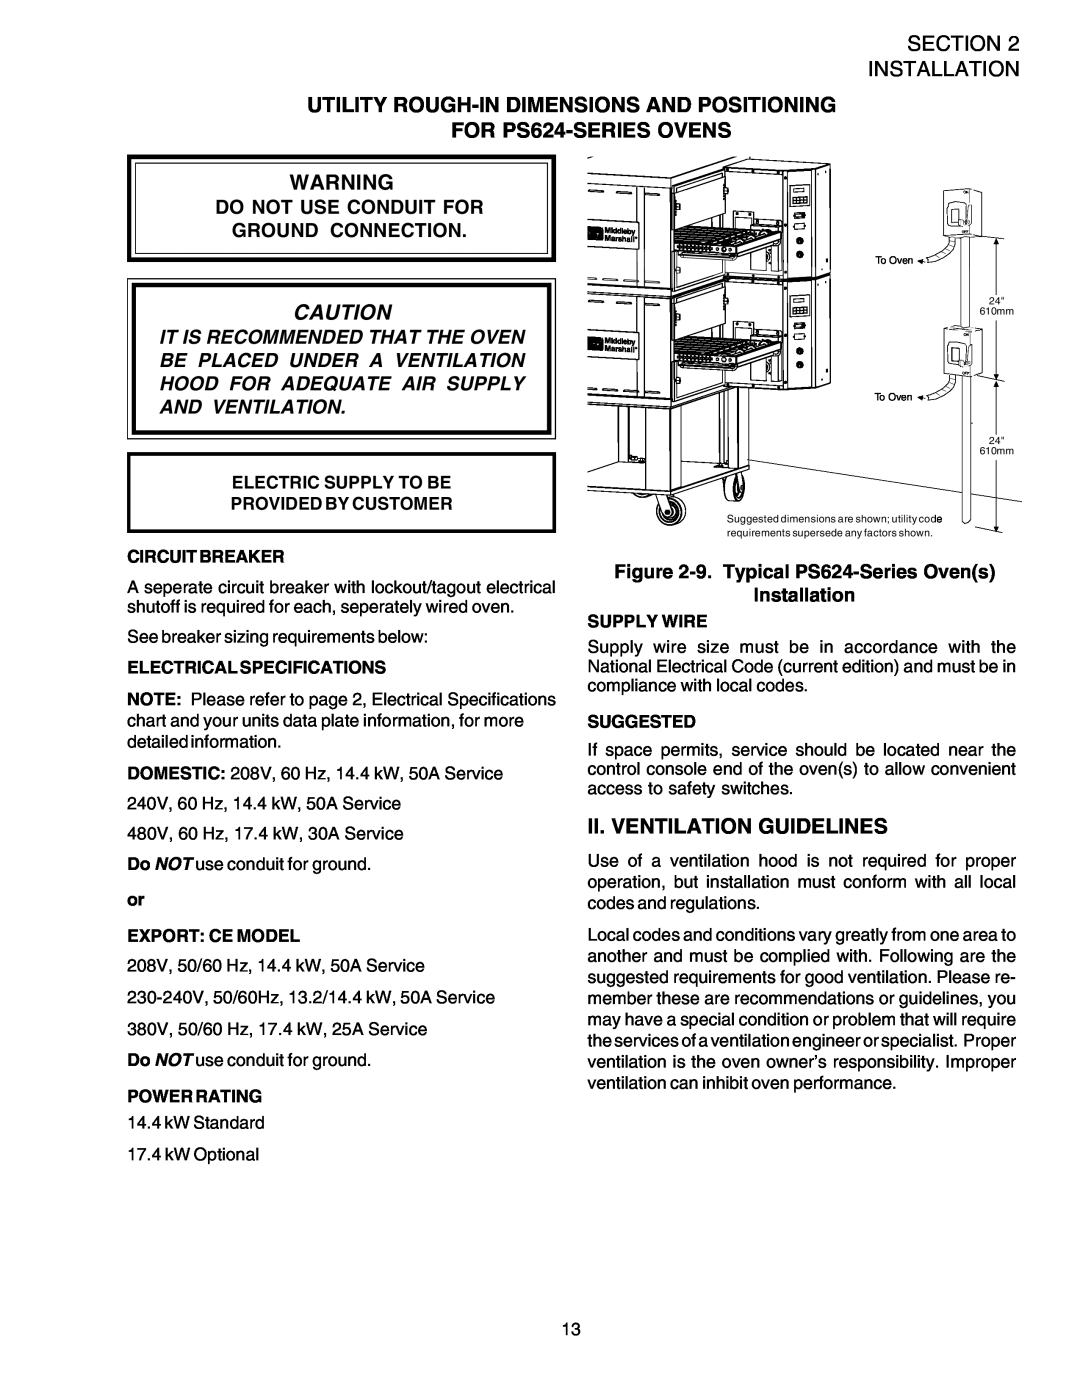 Middleby Marshall PS624E UTILITY ROUGH-IN DIMENSIONS AND POSITIONING FOR PS624-SERIES OVENS, Ii. Ventilation Guidelines 